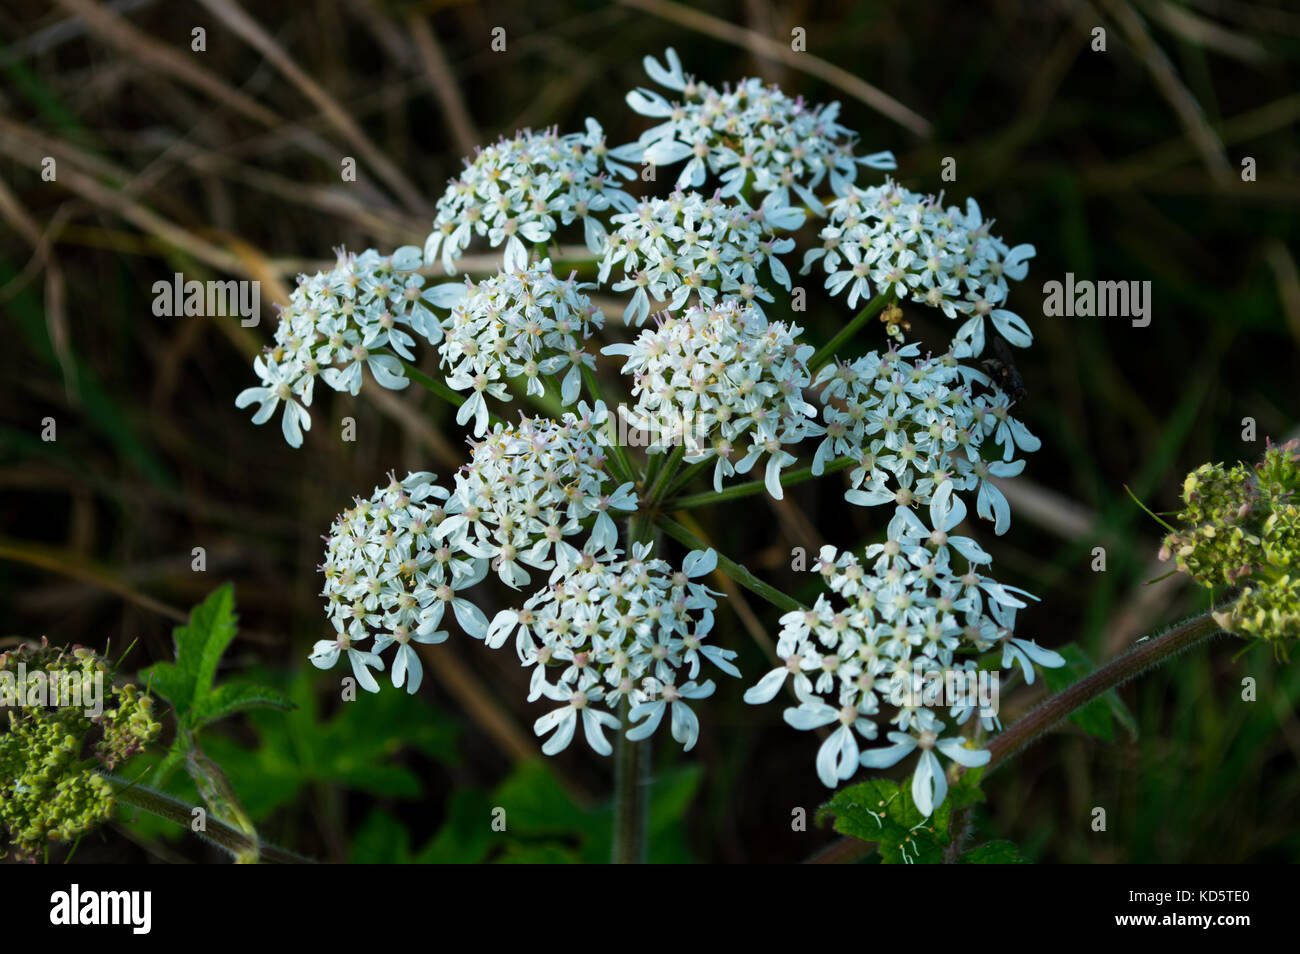 Macro British wild meadow Hemlock flower in full bloom with white and purple flowers in early autumn commonly mistaken for cow parsley or dropwort Stock Photo